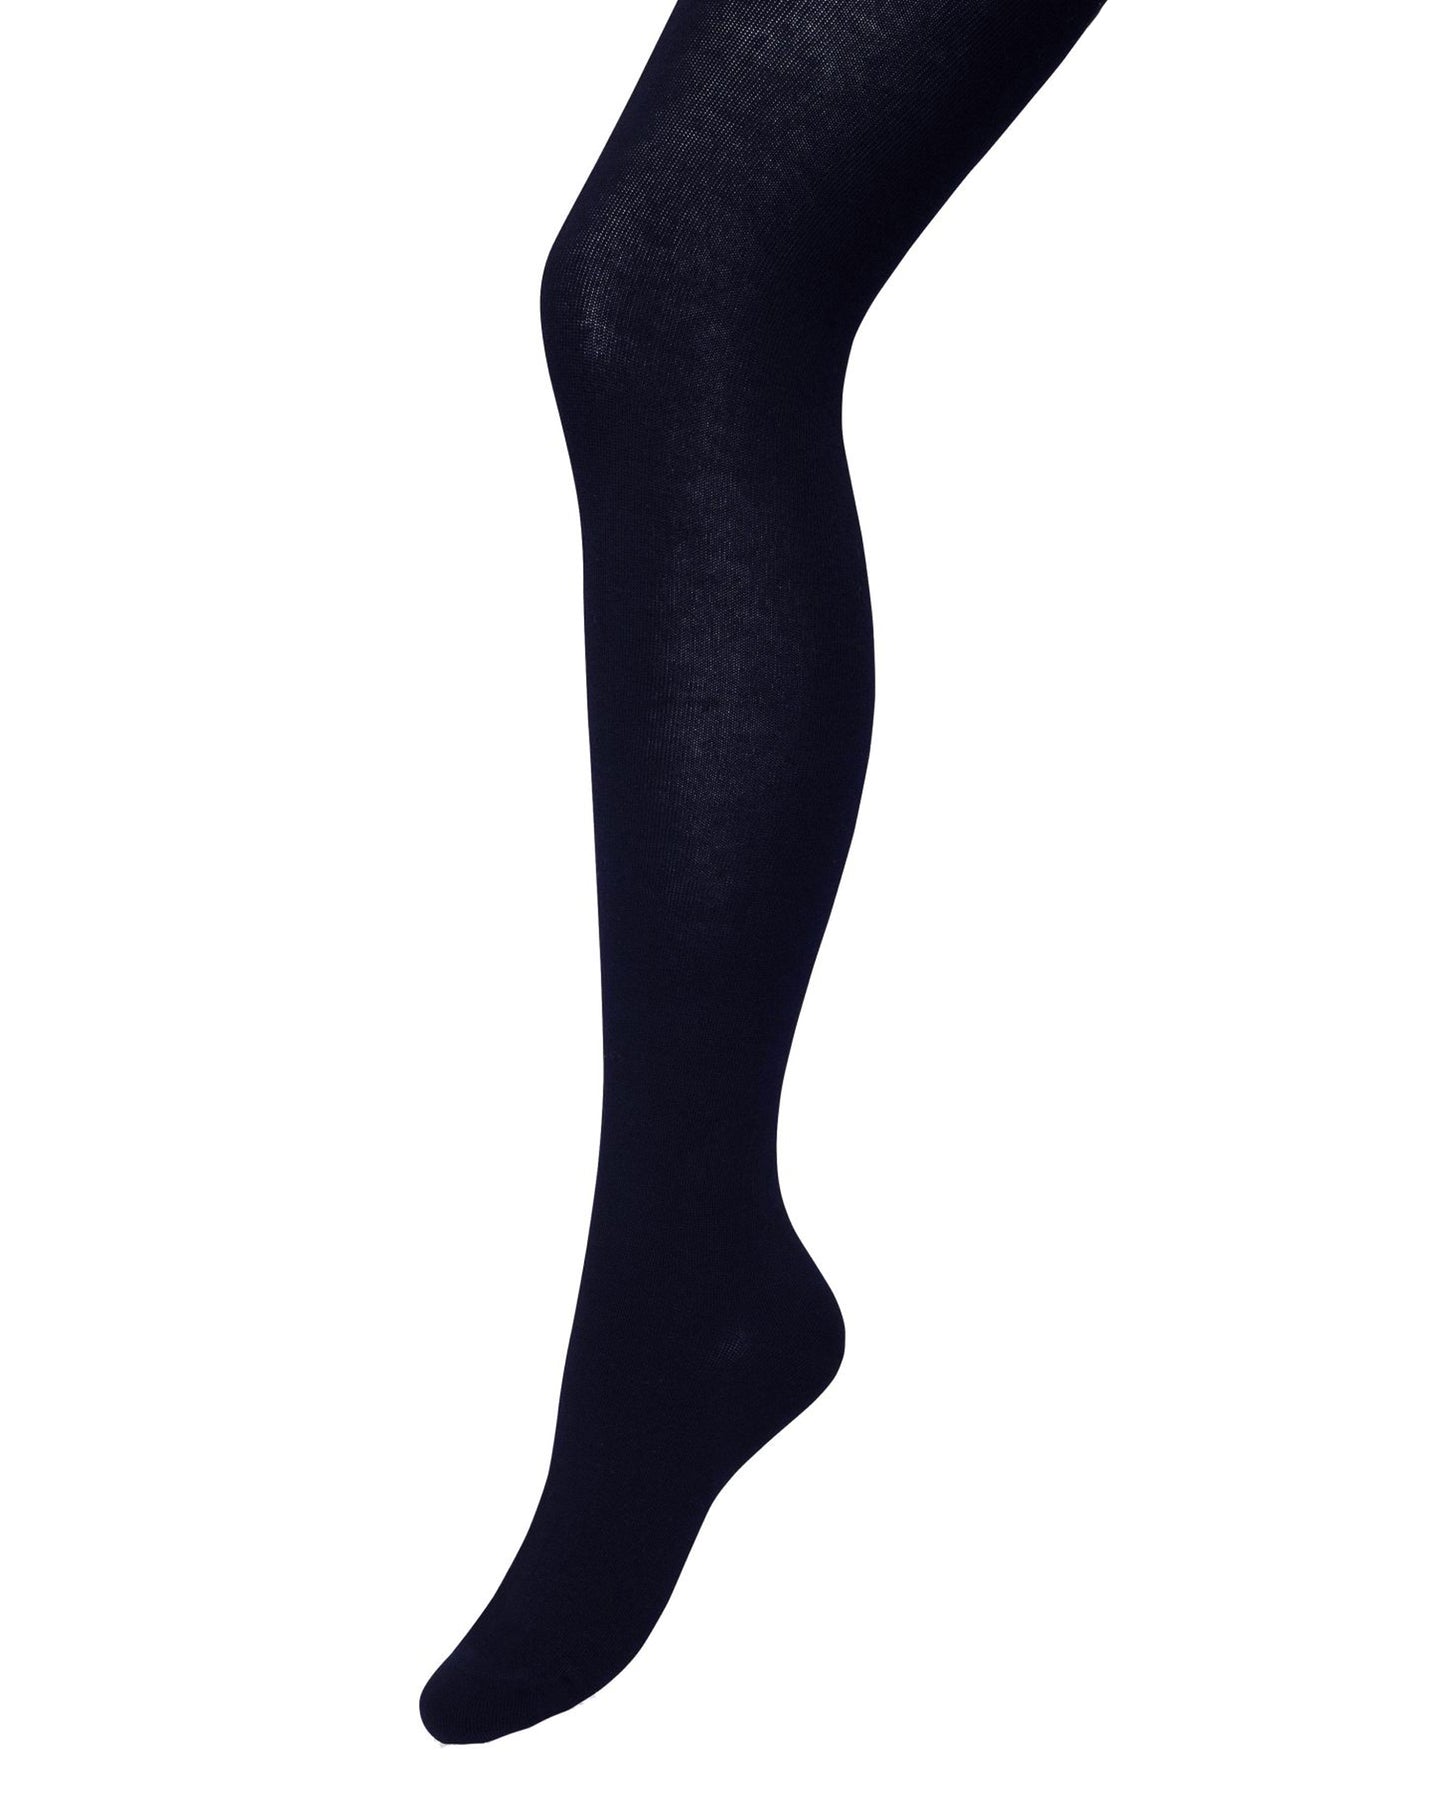 Bonnie Doon Bio Cotton Tights - Navy warm and soft knitted organic cotton Winter thermal tights.